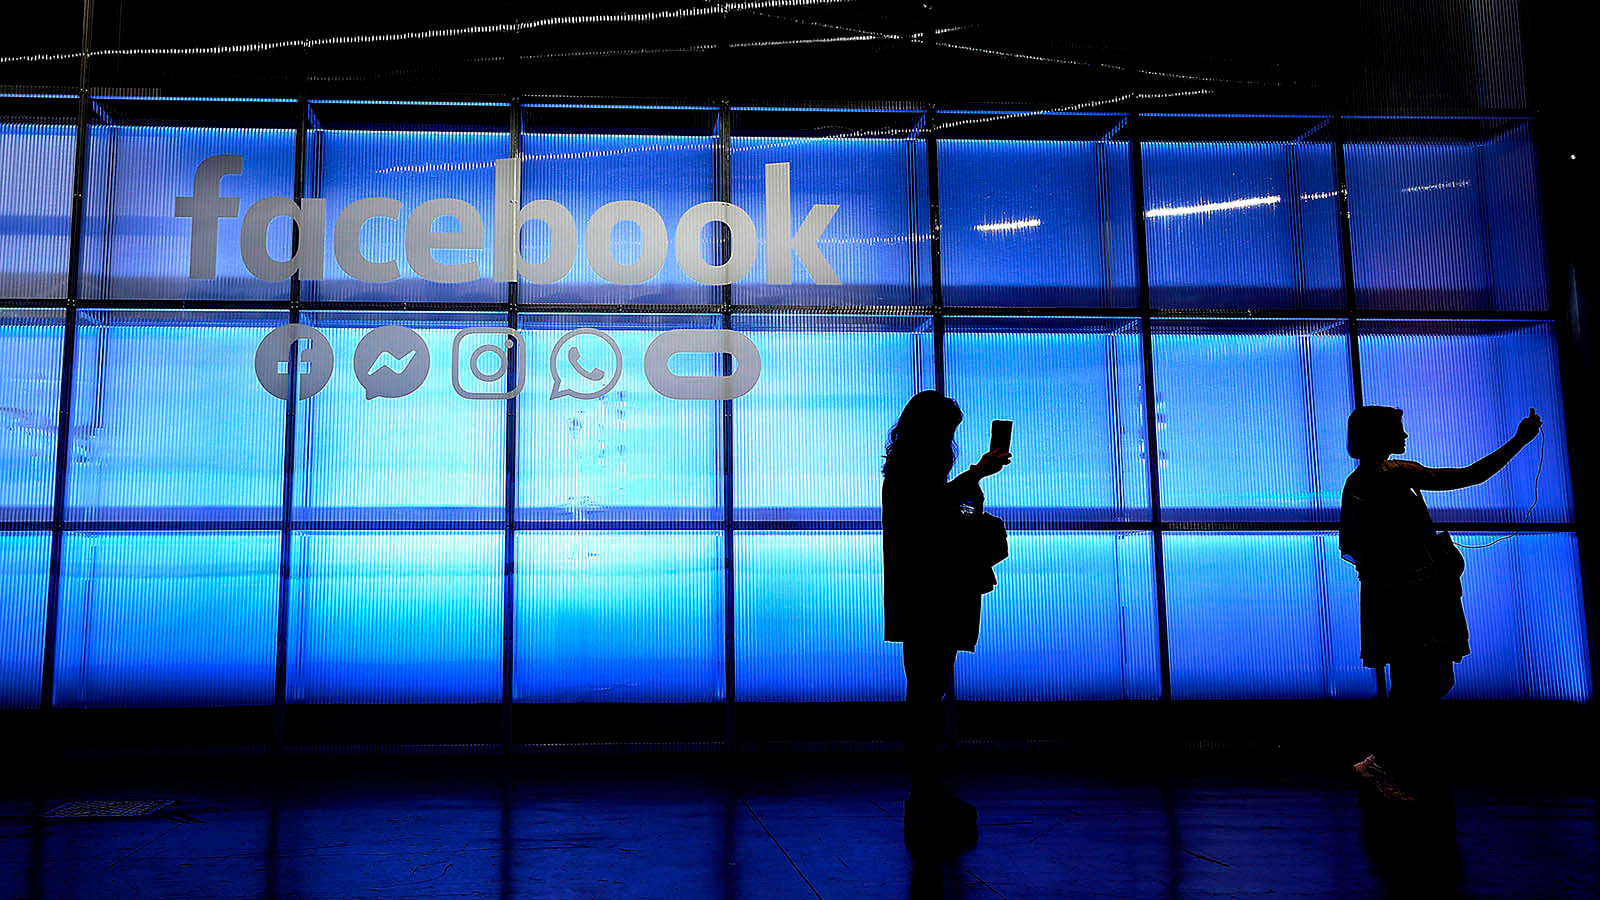 Facebook caters to more than 2 billion monthly users.